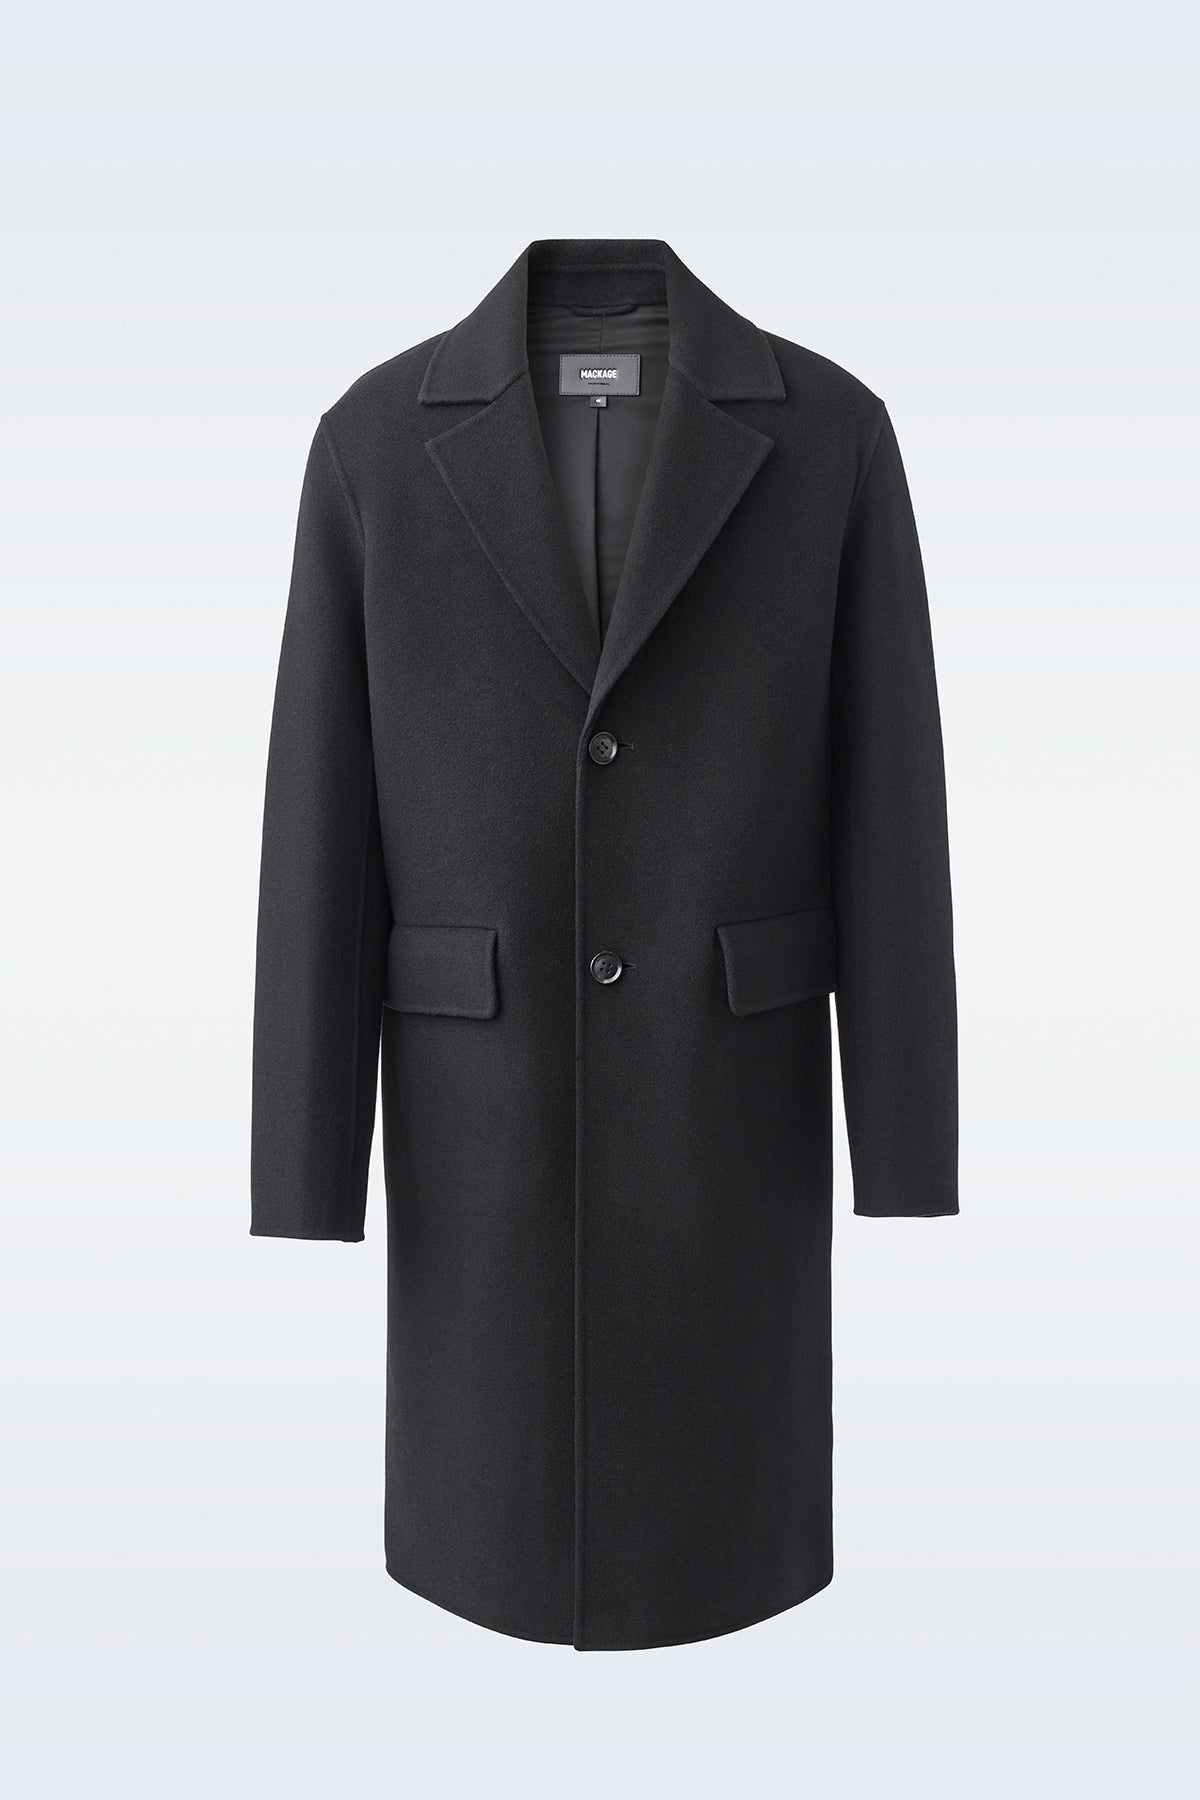 BENJAMIN Double-face wool coat with notched lapel - 5